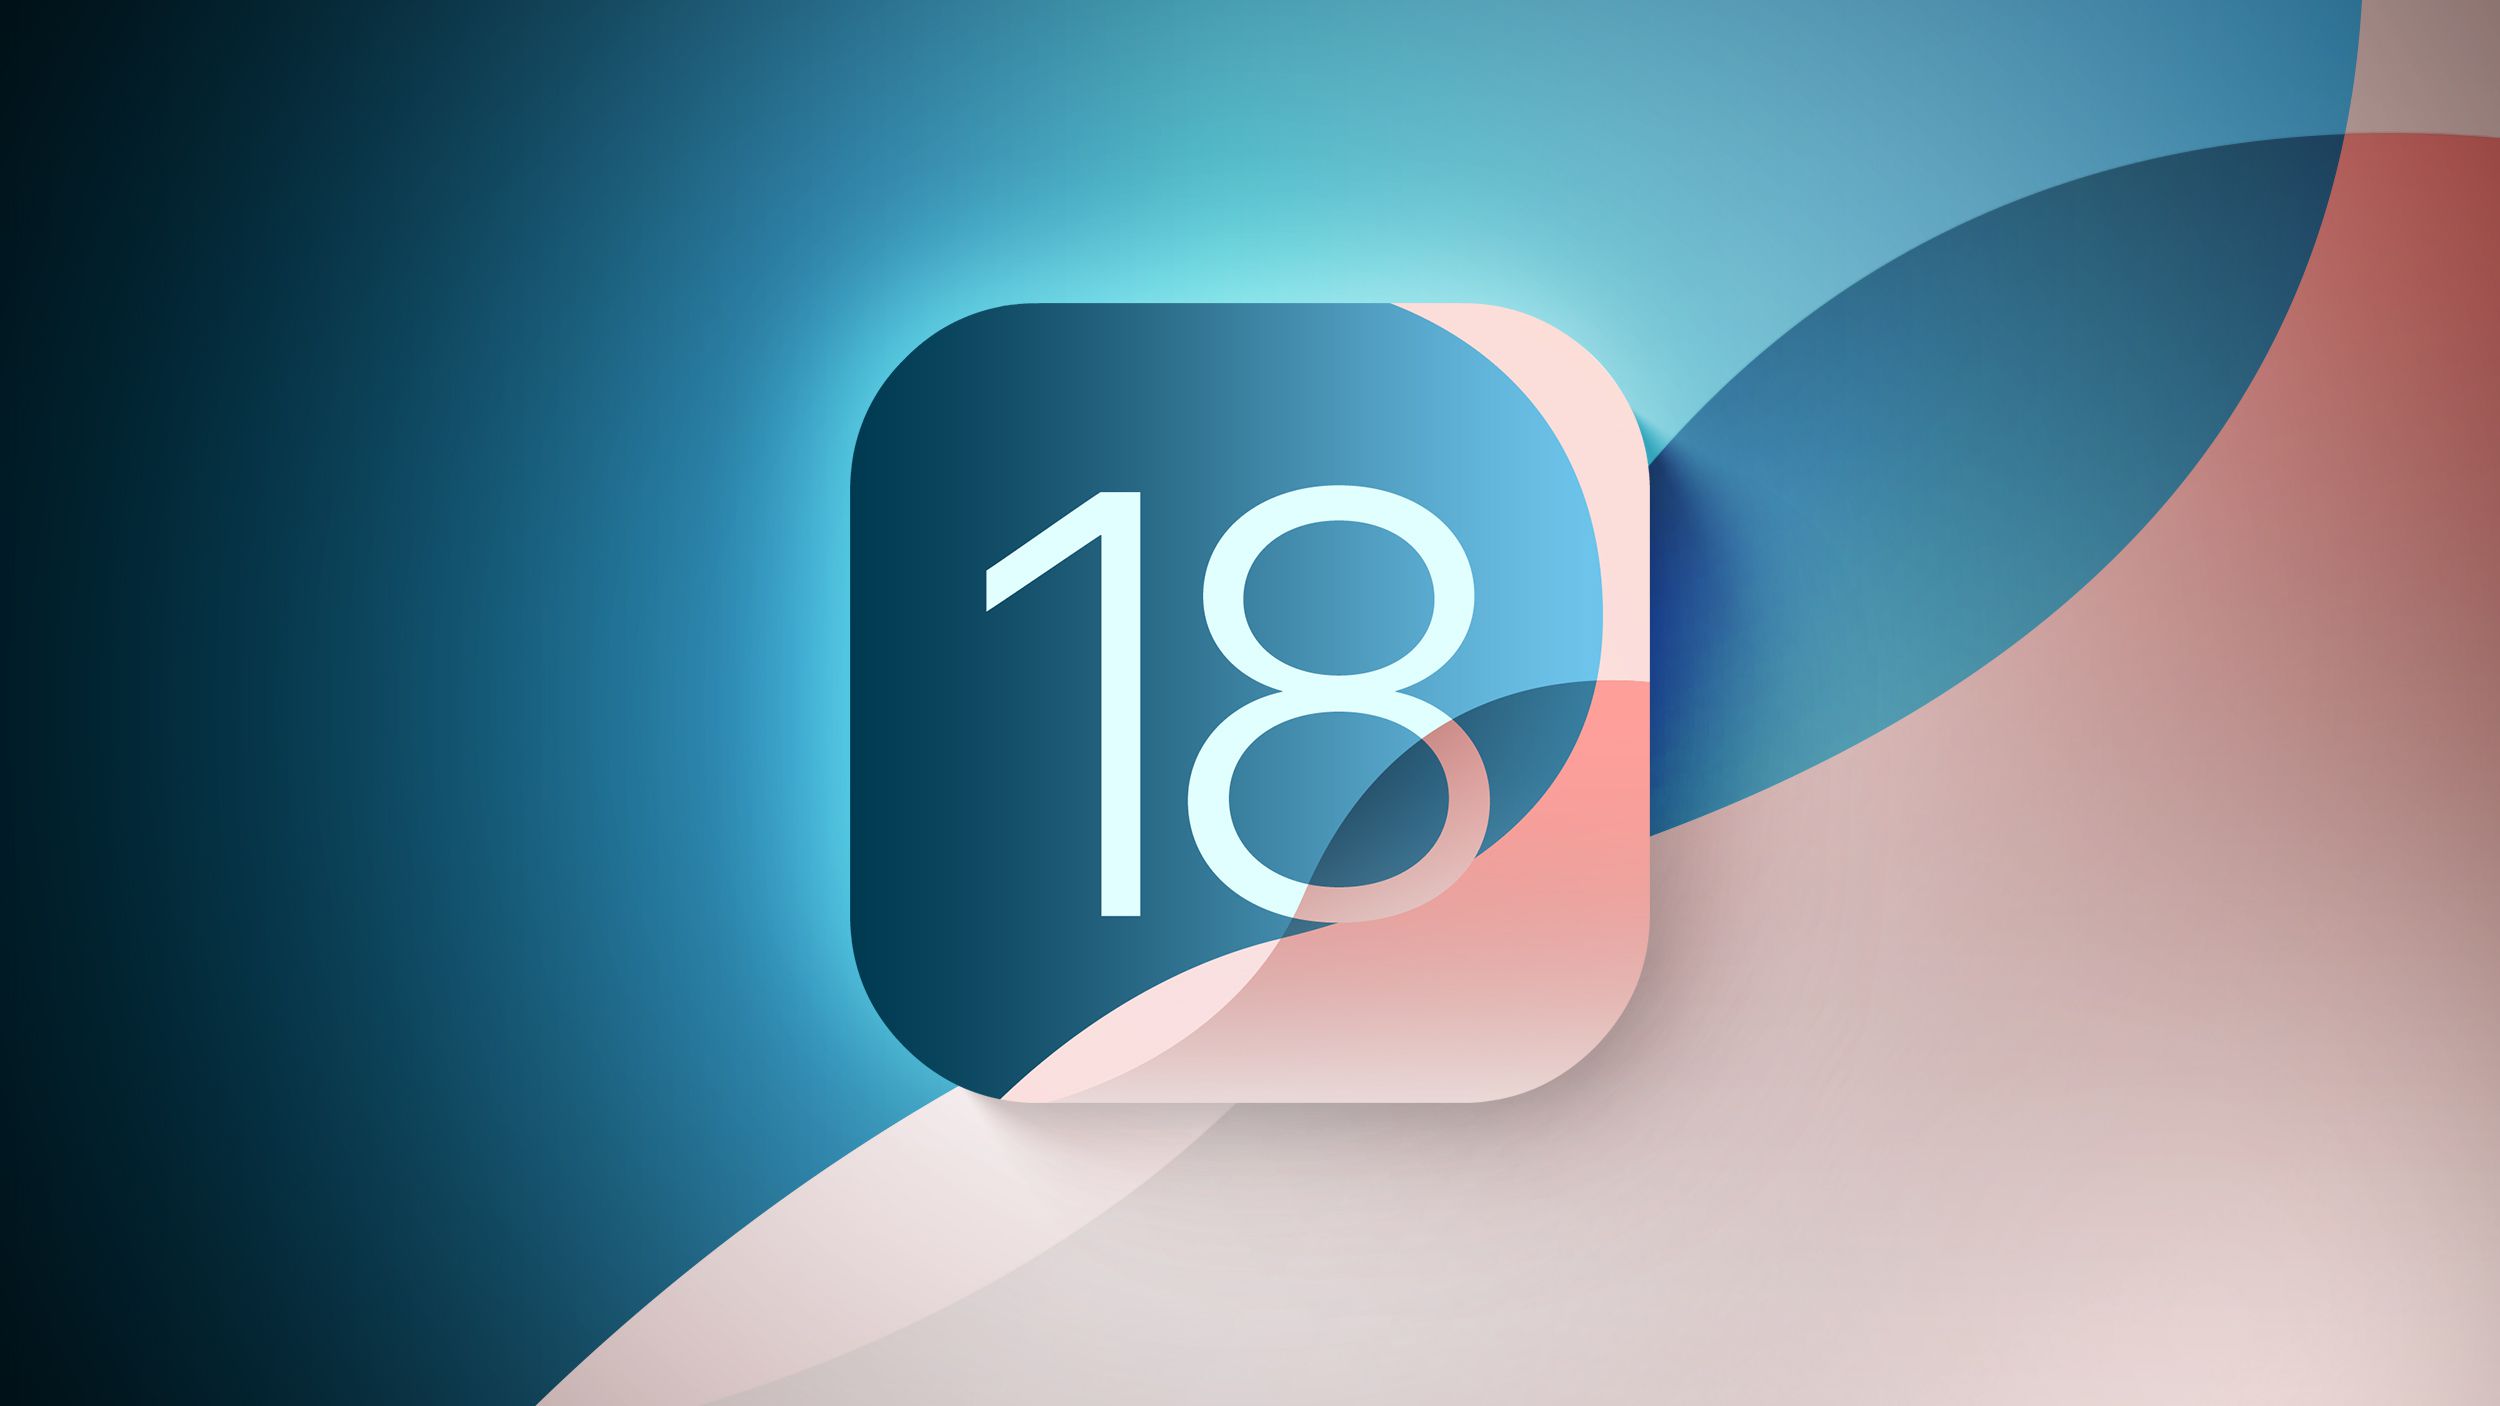 Apple has released the first public beta of iOS 18